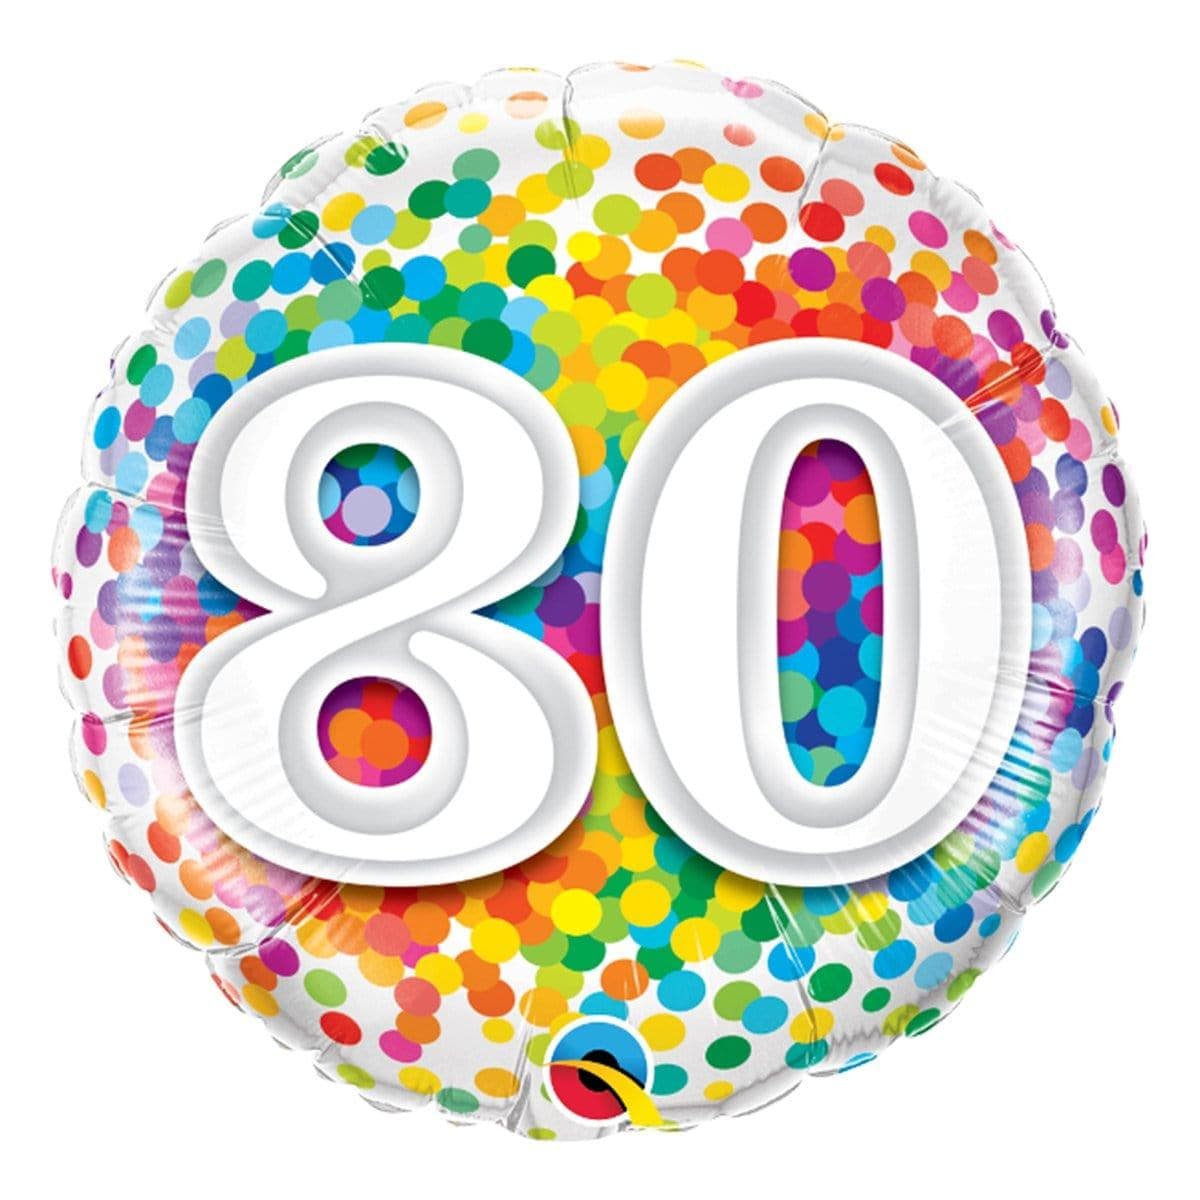 Buy Balloons 80th Birthday Rainbow Confetti Foil Balloon, 18 Inches sold at Party Expert